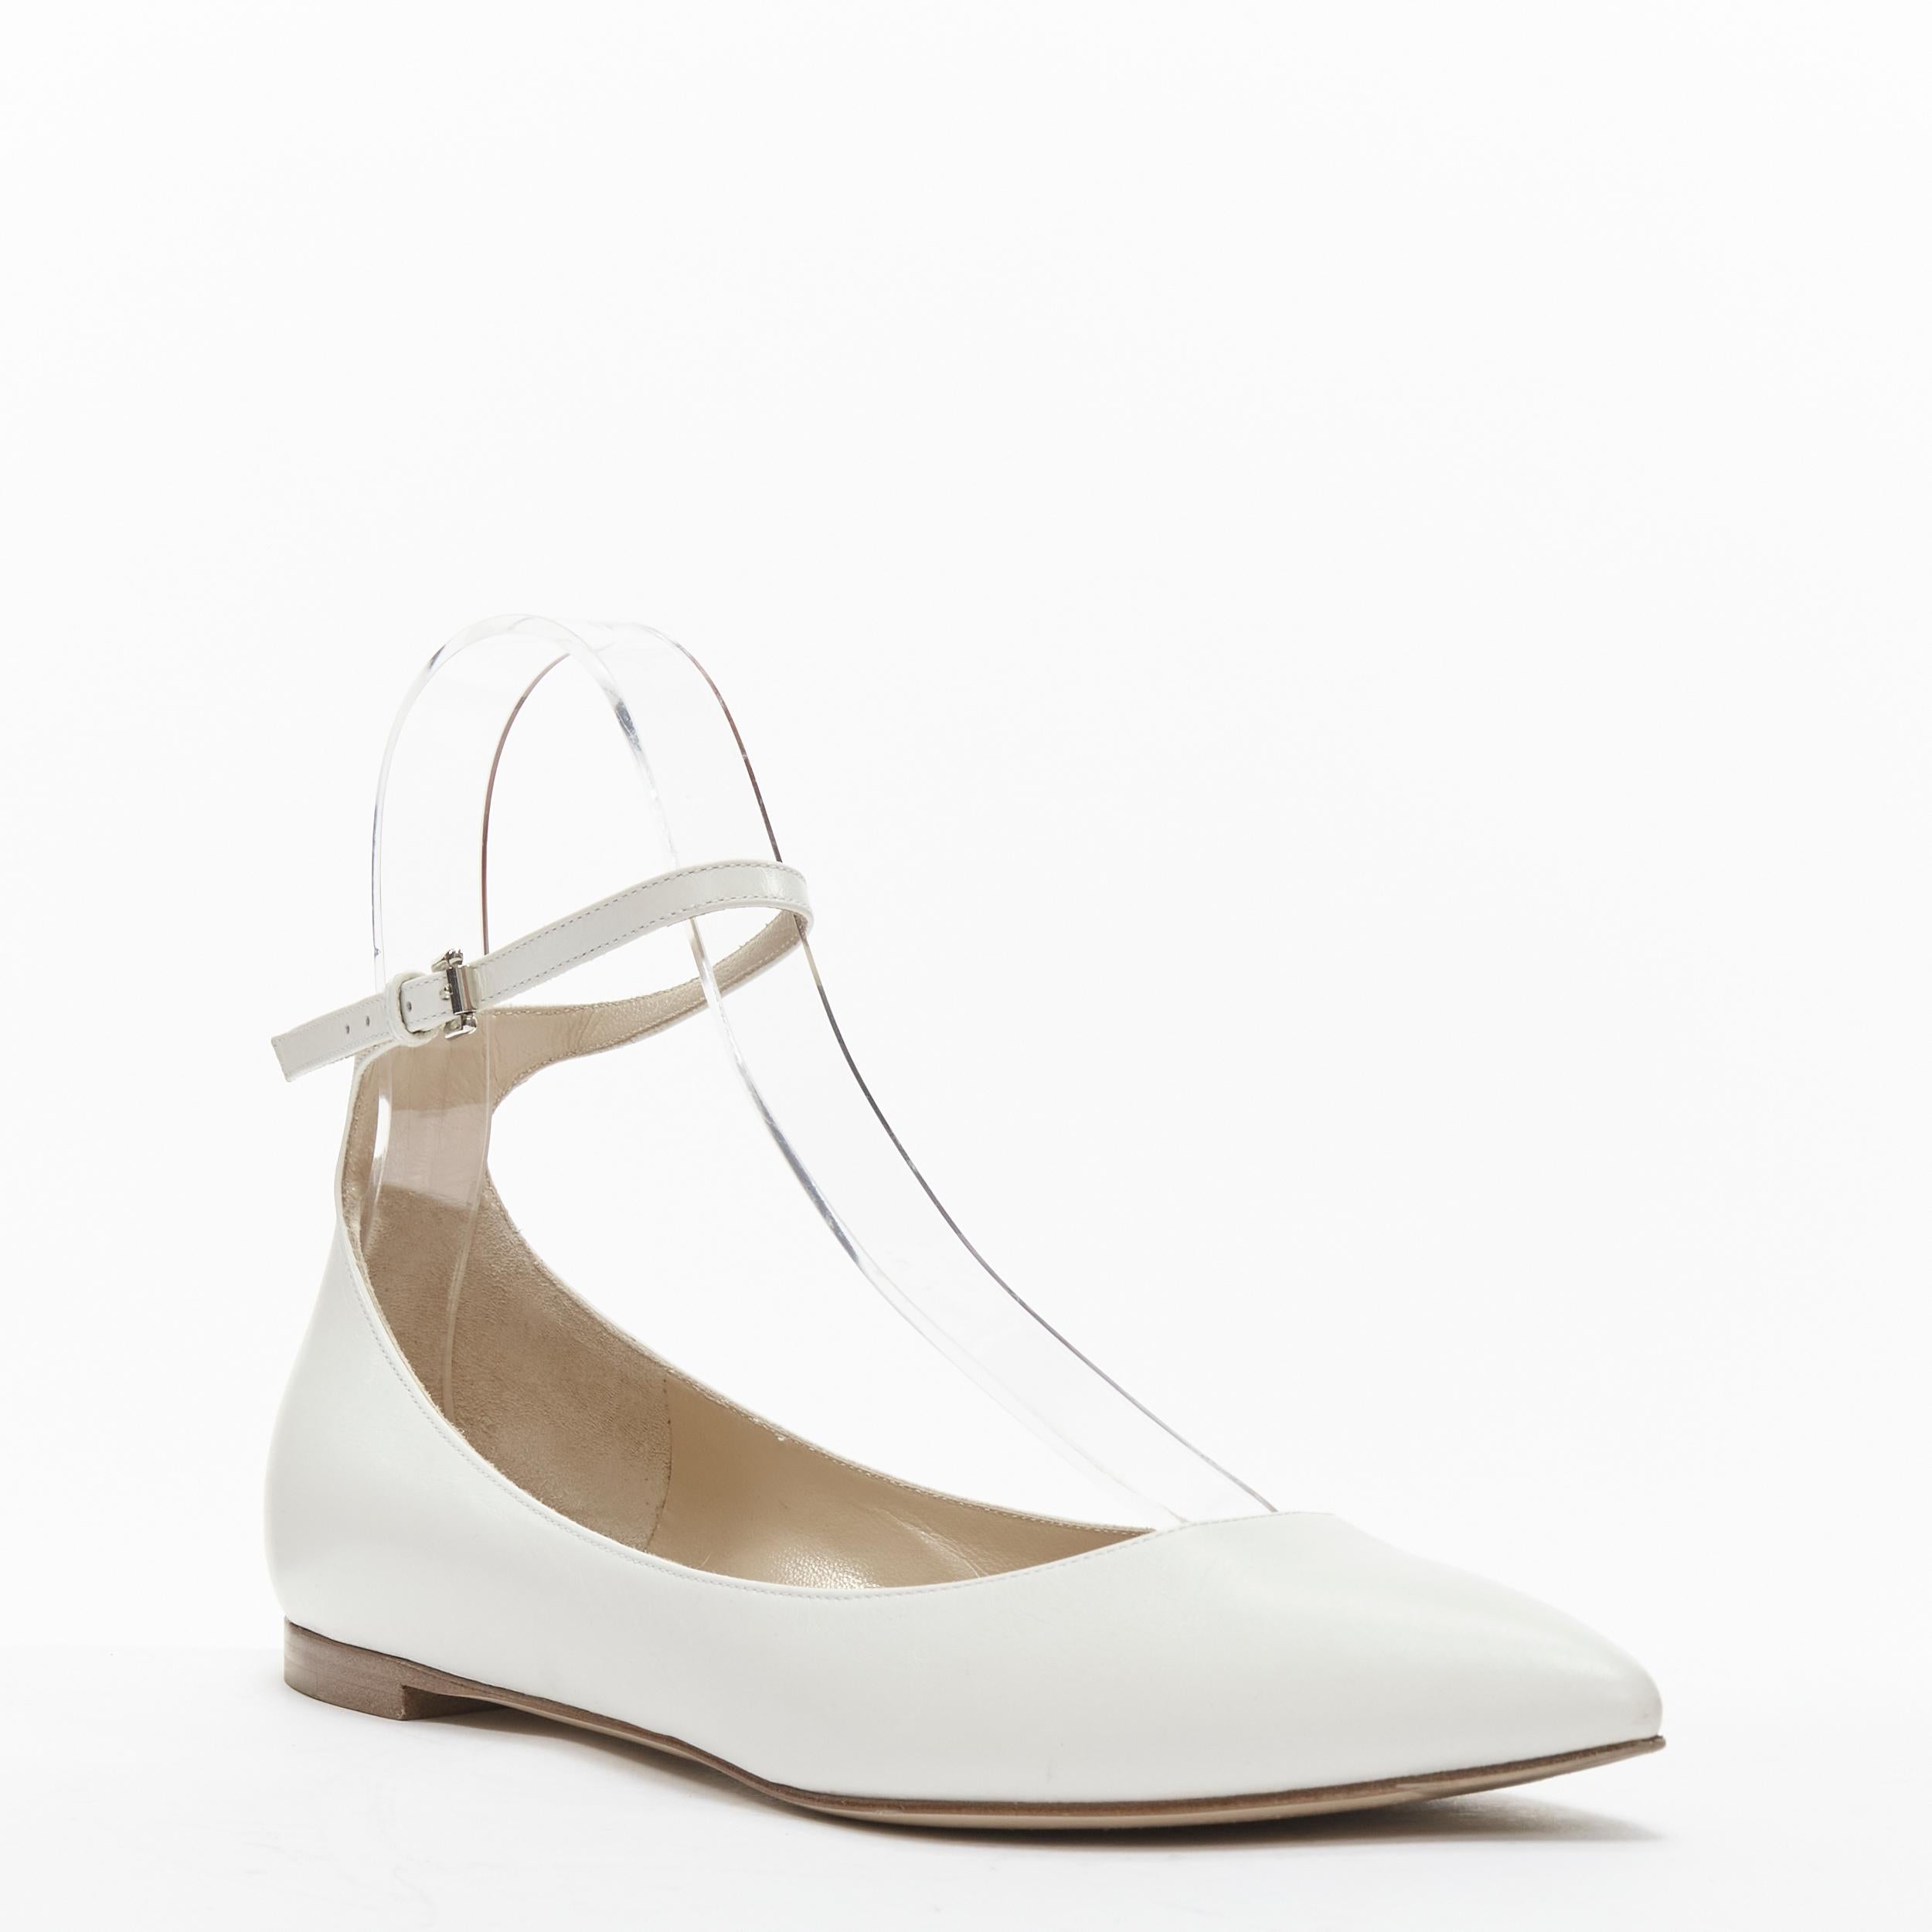 GIANVITO ROSSI white leather skinny ankle strap pointy flats EU37.5
Reference: LNKO/A02103
Brand: Gianvito Rossi
Material: Leather
Color: White
Pattern: Solid
Closure: Ankle Strap
Lining: Leather
Made in: Italy

CONDITION:
Condition: Very good, this